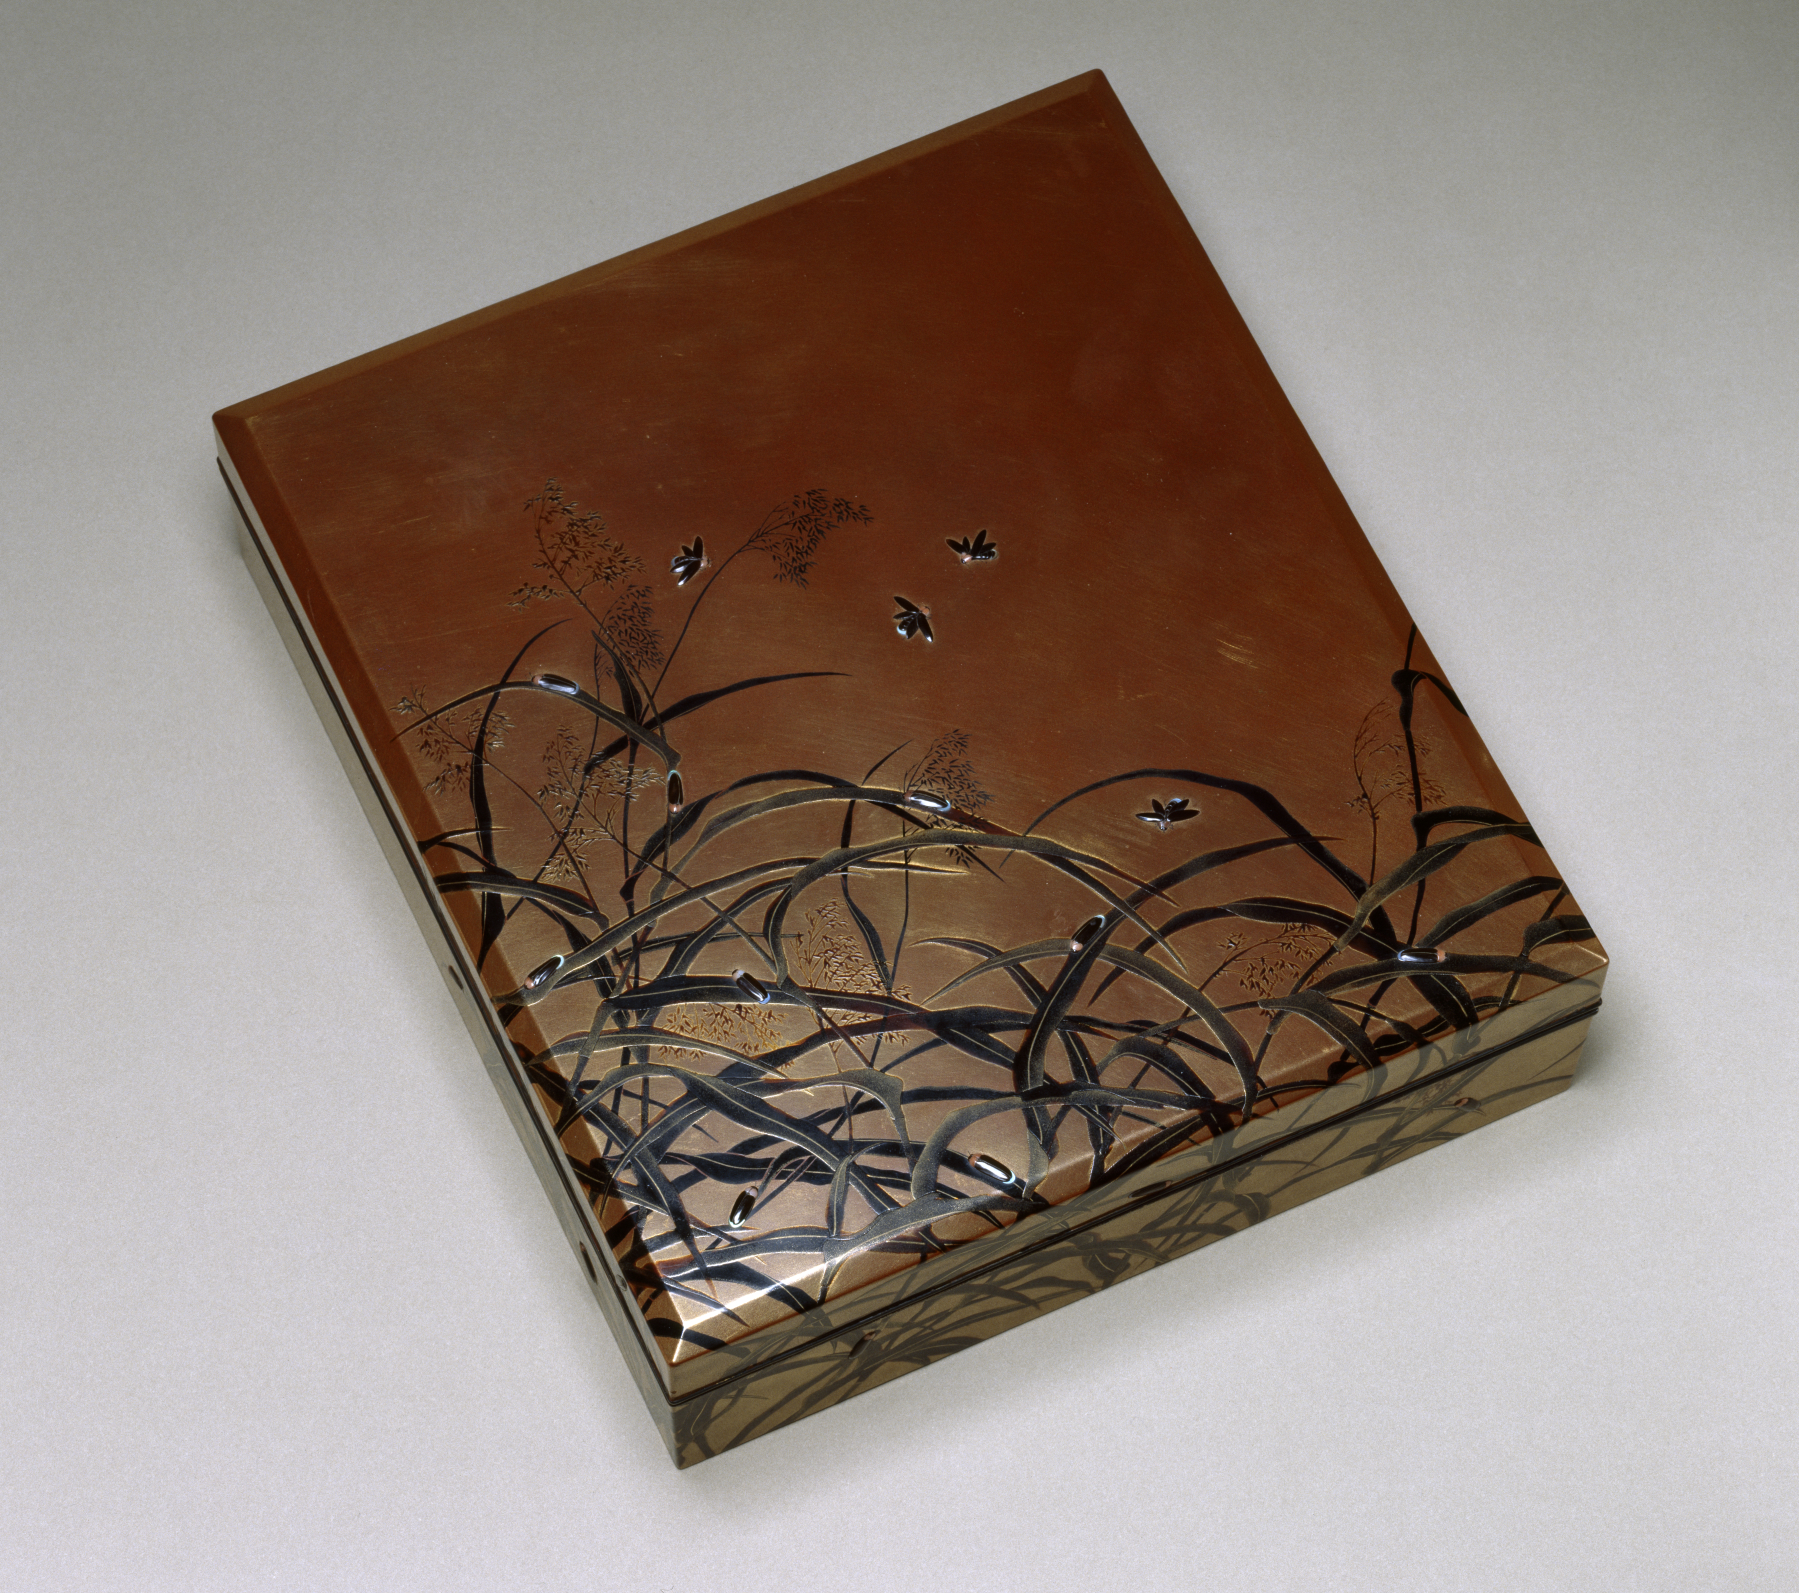 Image for Box for Writing Implements (suzuri-bako) with Fireflies and Reeds